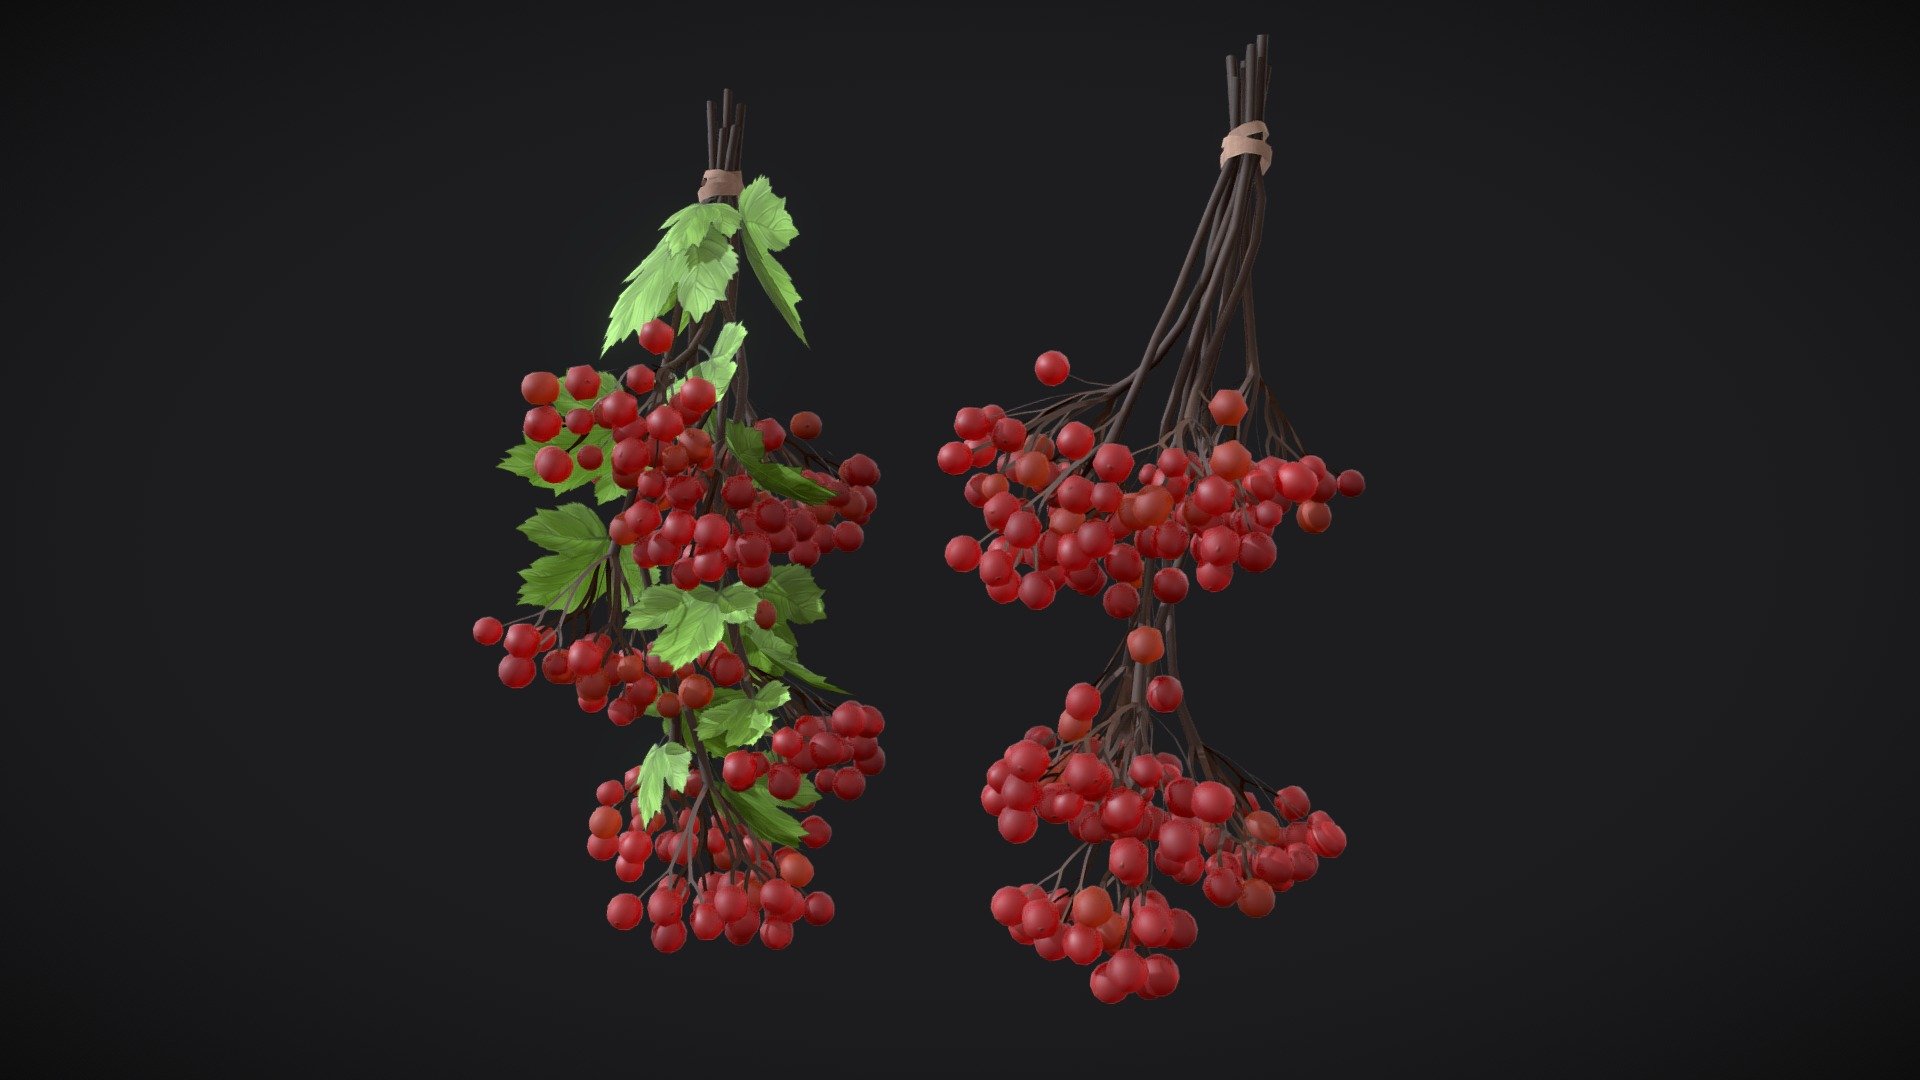 Guelder rose (ukr. Калина) model. Overlapping UVs (texture atlas)

The archive contains following files:




.MA file (original MAYA file, version 2023)

FBX file

OBJ

Texture sets:

1) Guelder rose (2048 * 2048):




BaseColor

Roughness*

Normal*

SSS*

2) Leaves (1024 * 1024):




BaseColor

Opacity

Roughness*

*You can as well use just BaseColor and Opacity textures to lighten up a project. 

If you have any additional questions or any problems related to the model, kindly contact me: katy.b2802@gmail.com - Guelder rose, red berries - Buy Royalty Free 3D model by Enkarra 3d model